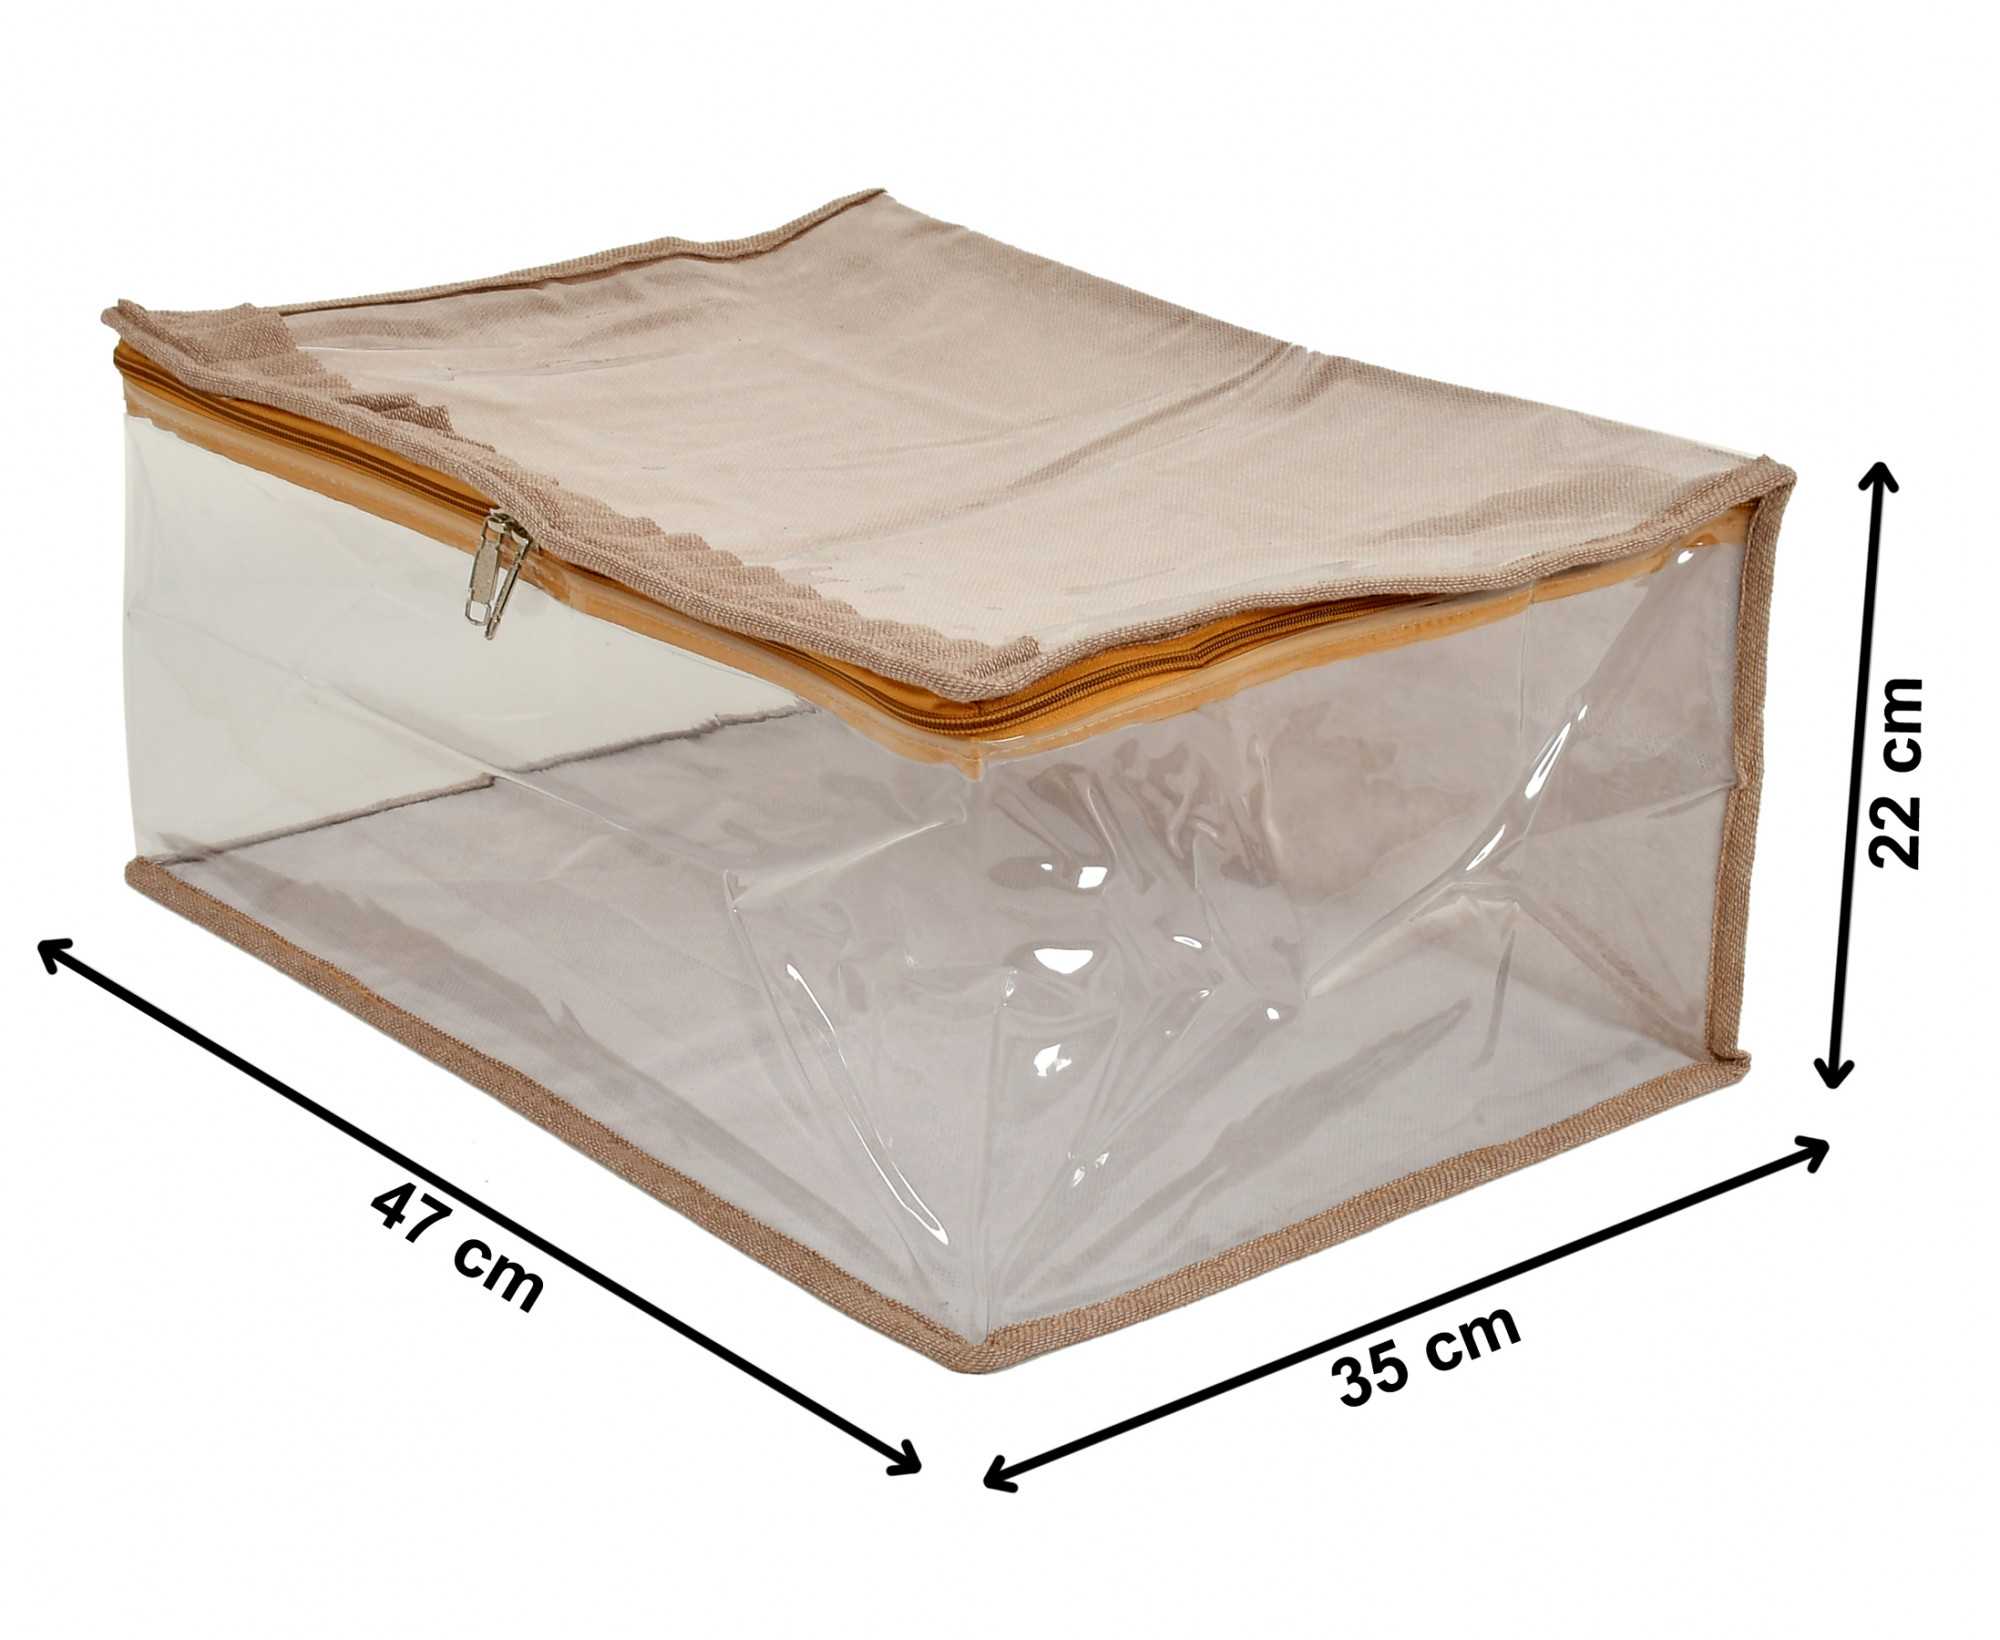 Kuber Industries Laminated Transparent Waterproof Underbed Storage Bag, Storage Organiser For Quilts, Blankets, Pillows, Bedsheets, Towels, Summer and Winter Cloth (Ivory)-HS_38_KUBMART21449